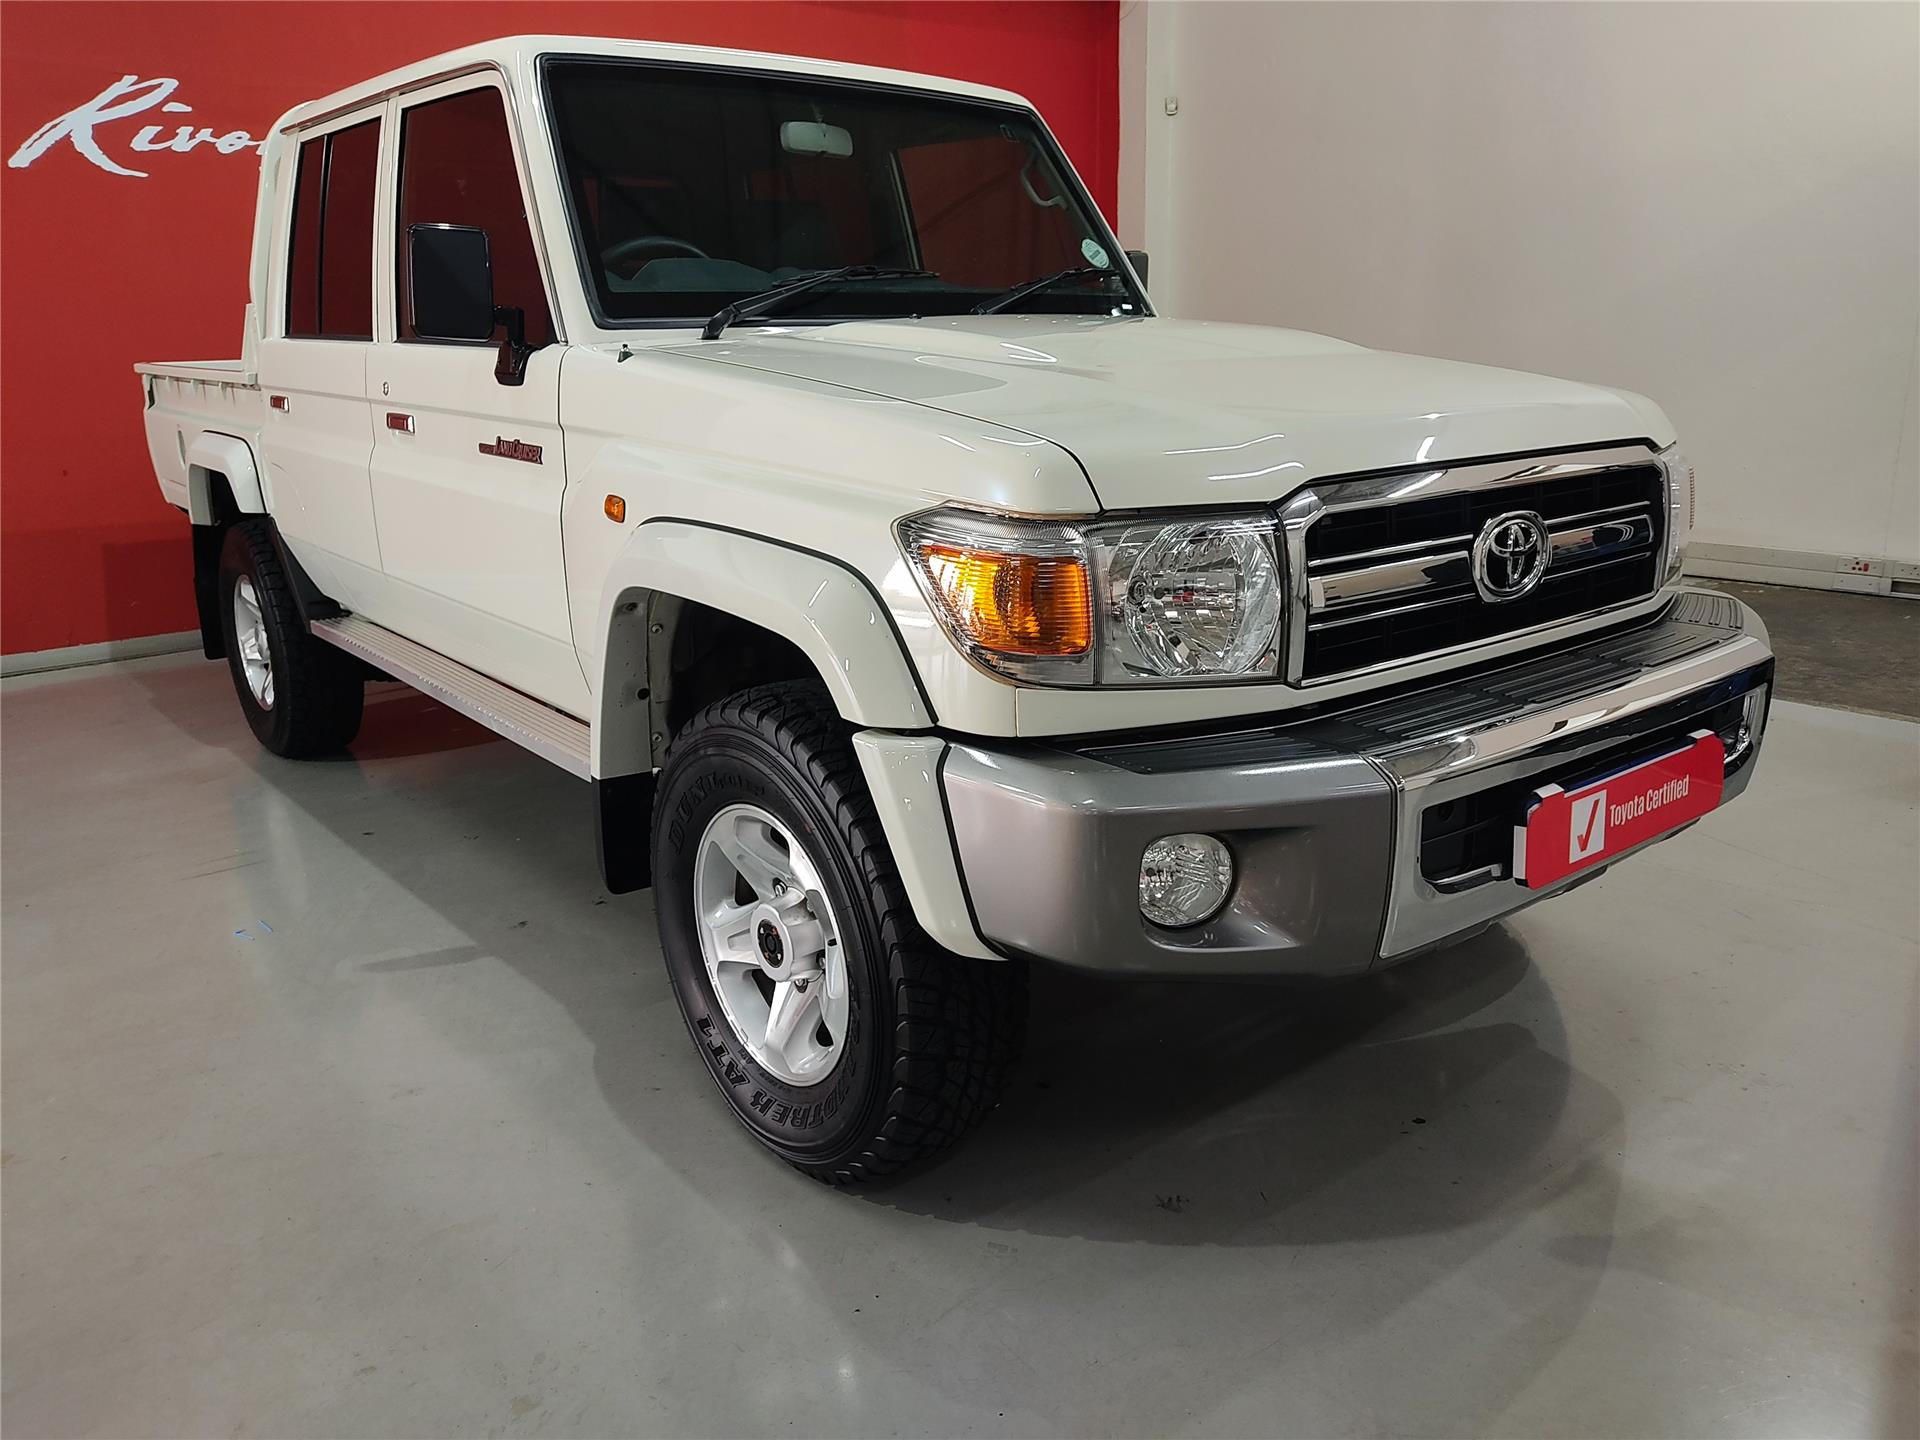 2022 Toyota Land Cruiser 79  for sale - 1075249/1